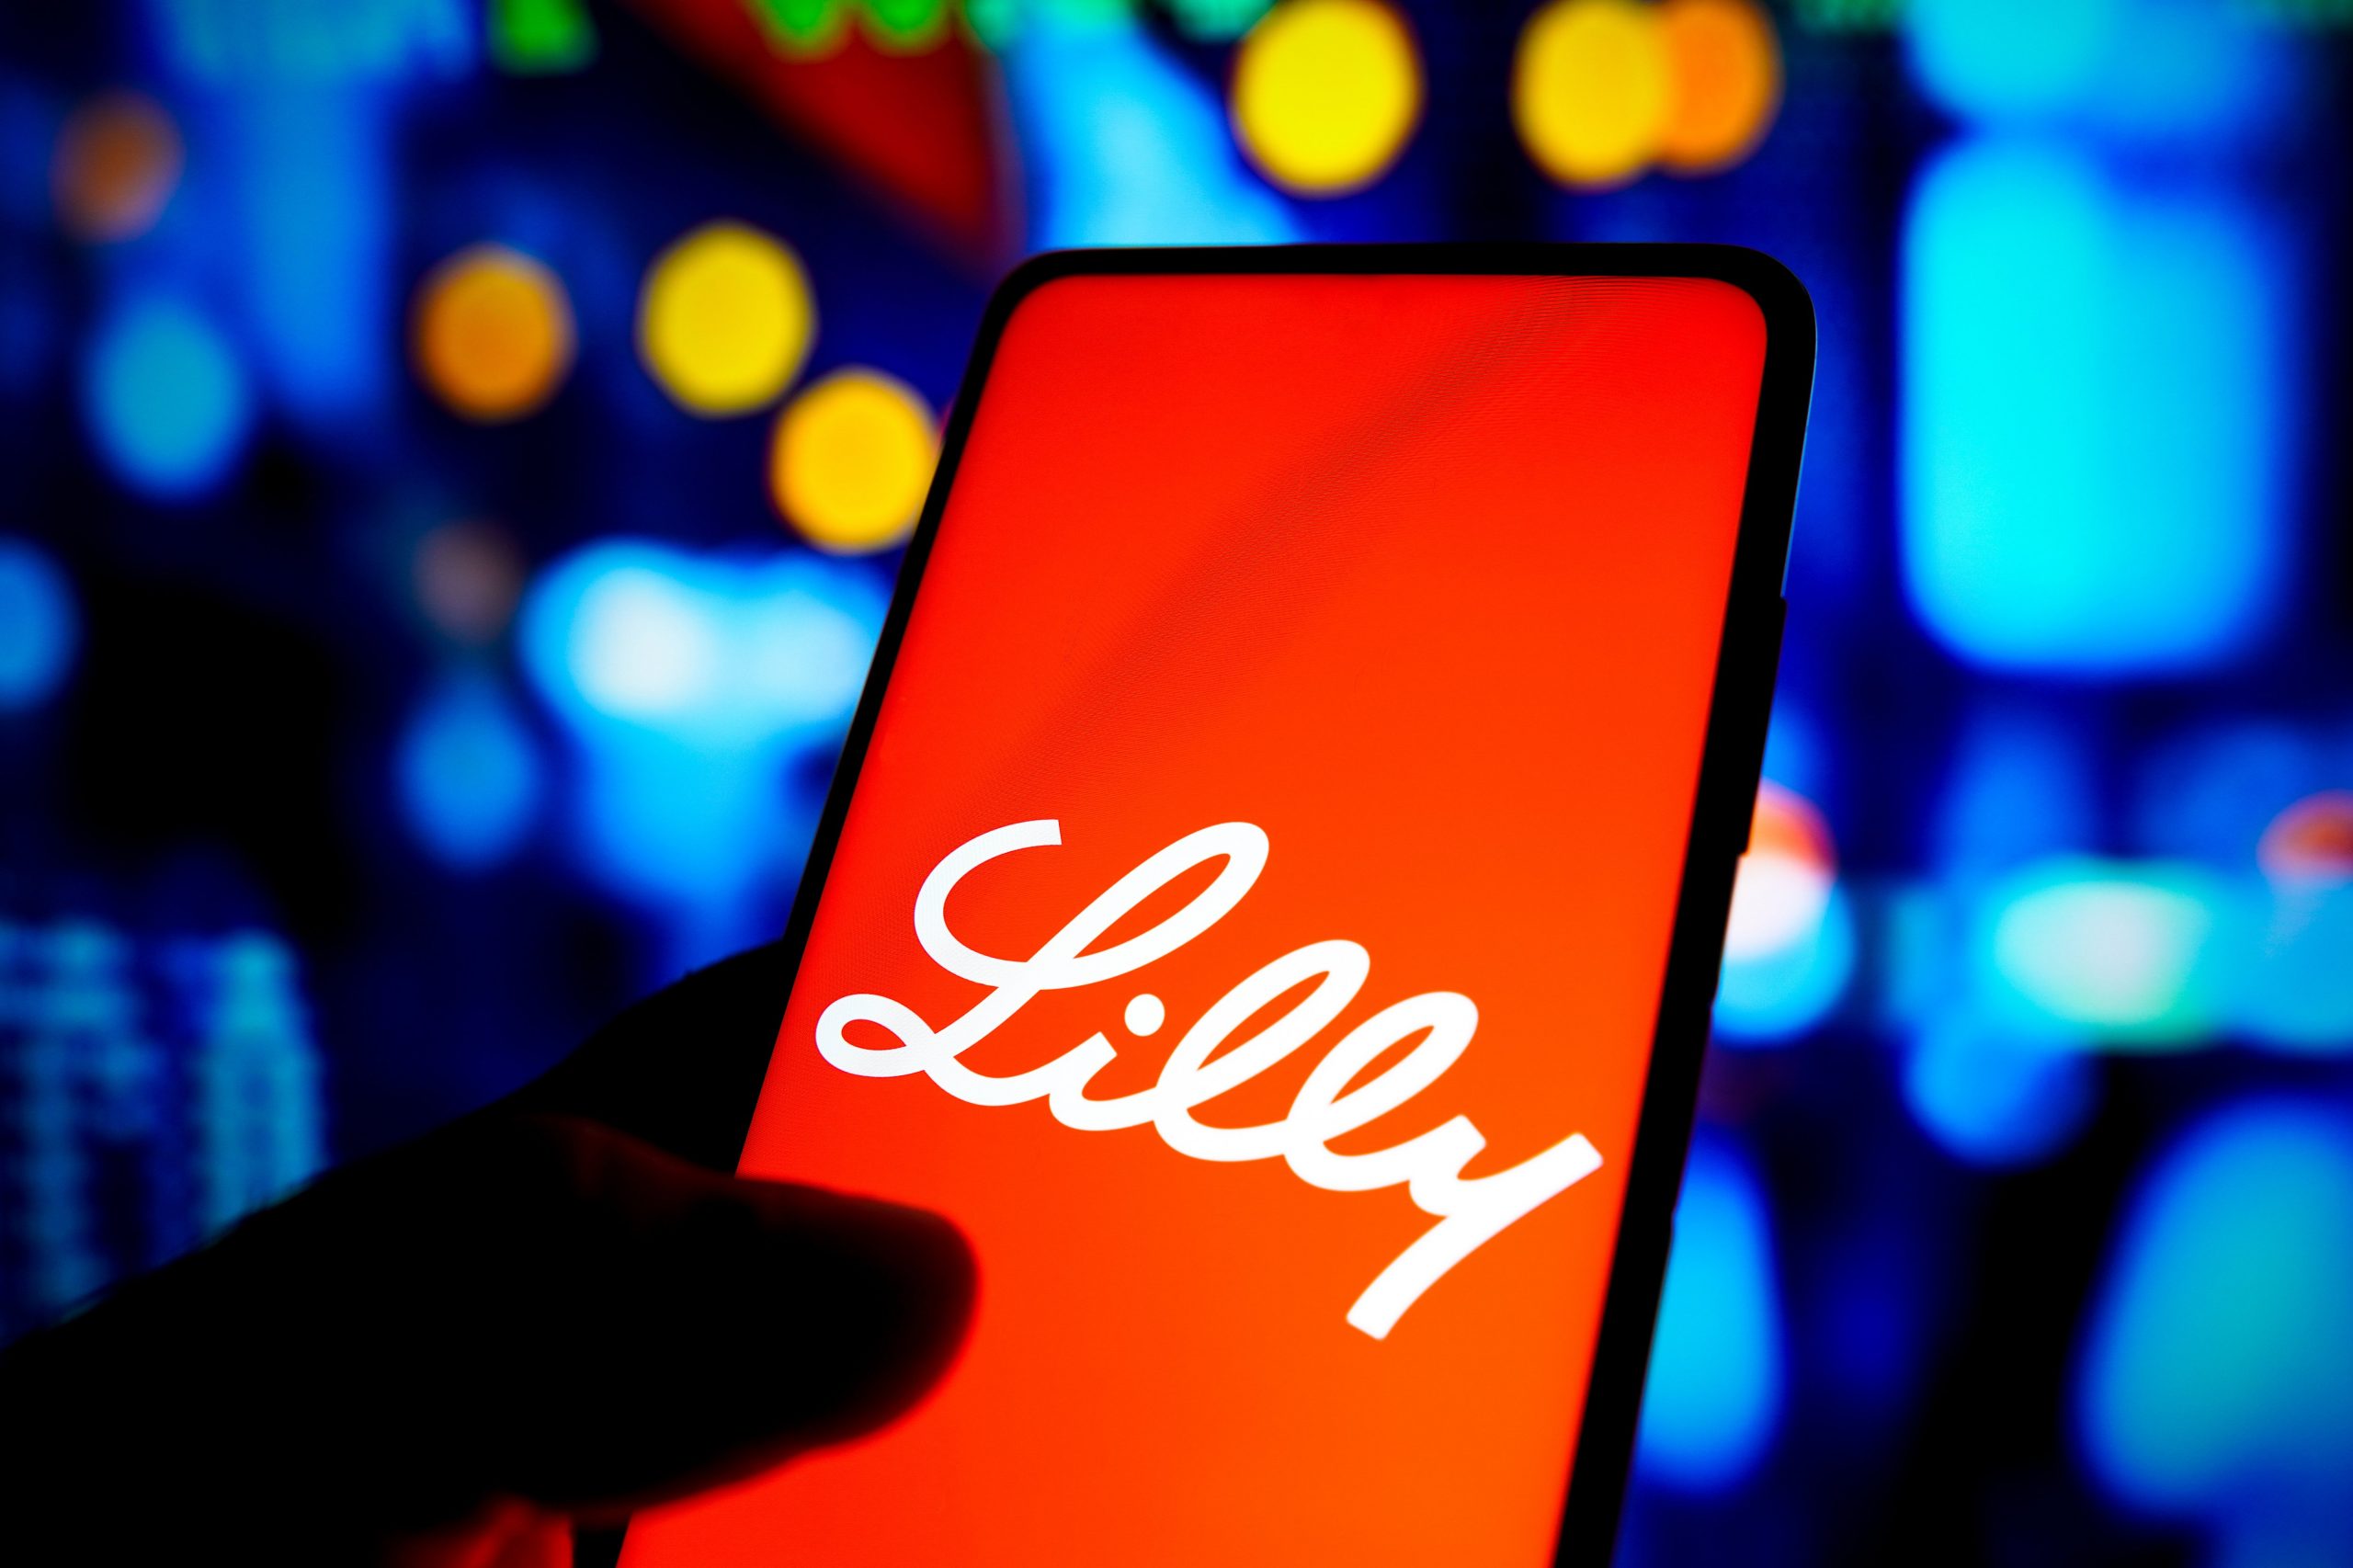 Insulin producer Eli Lilly sees stock drop because of a fake blue check tweet